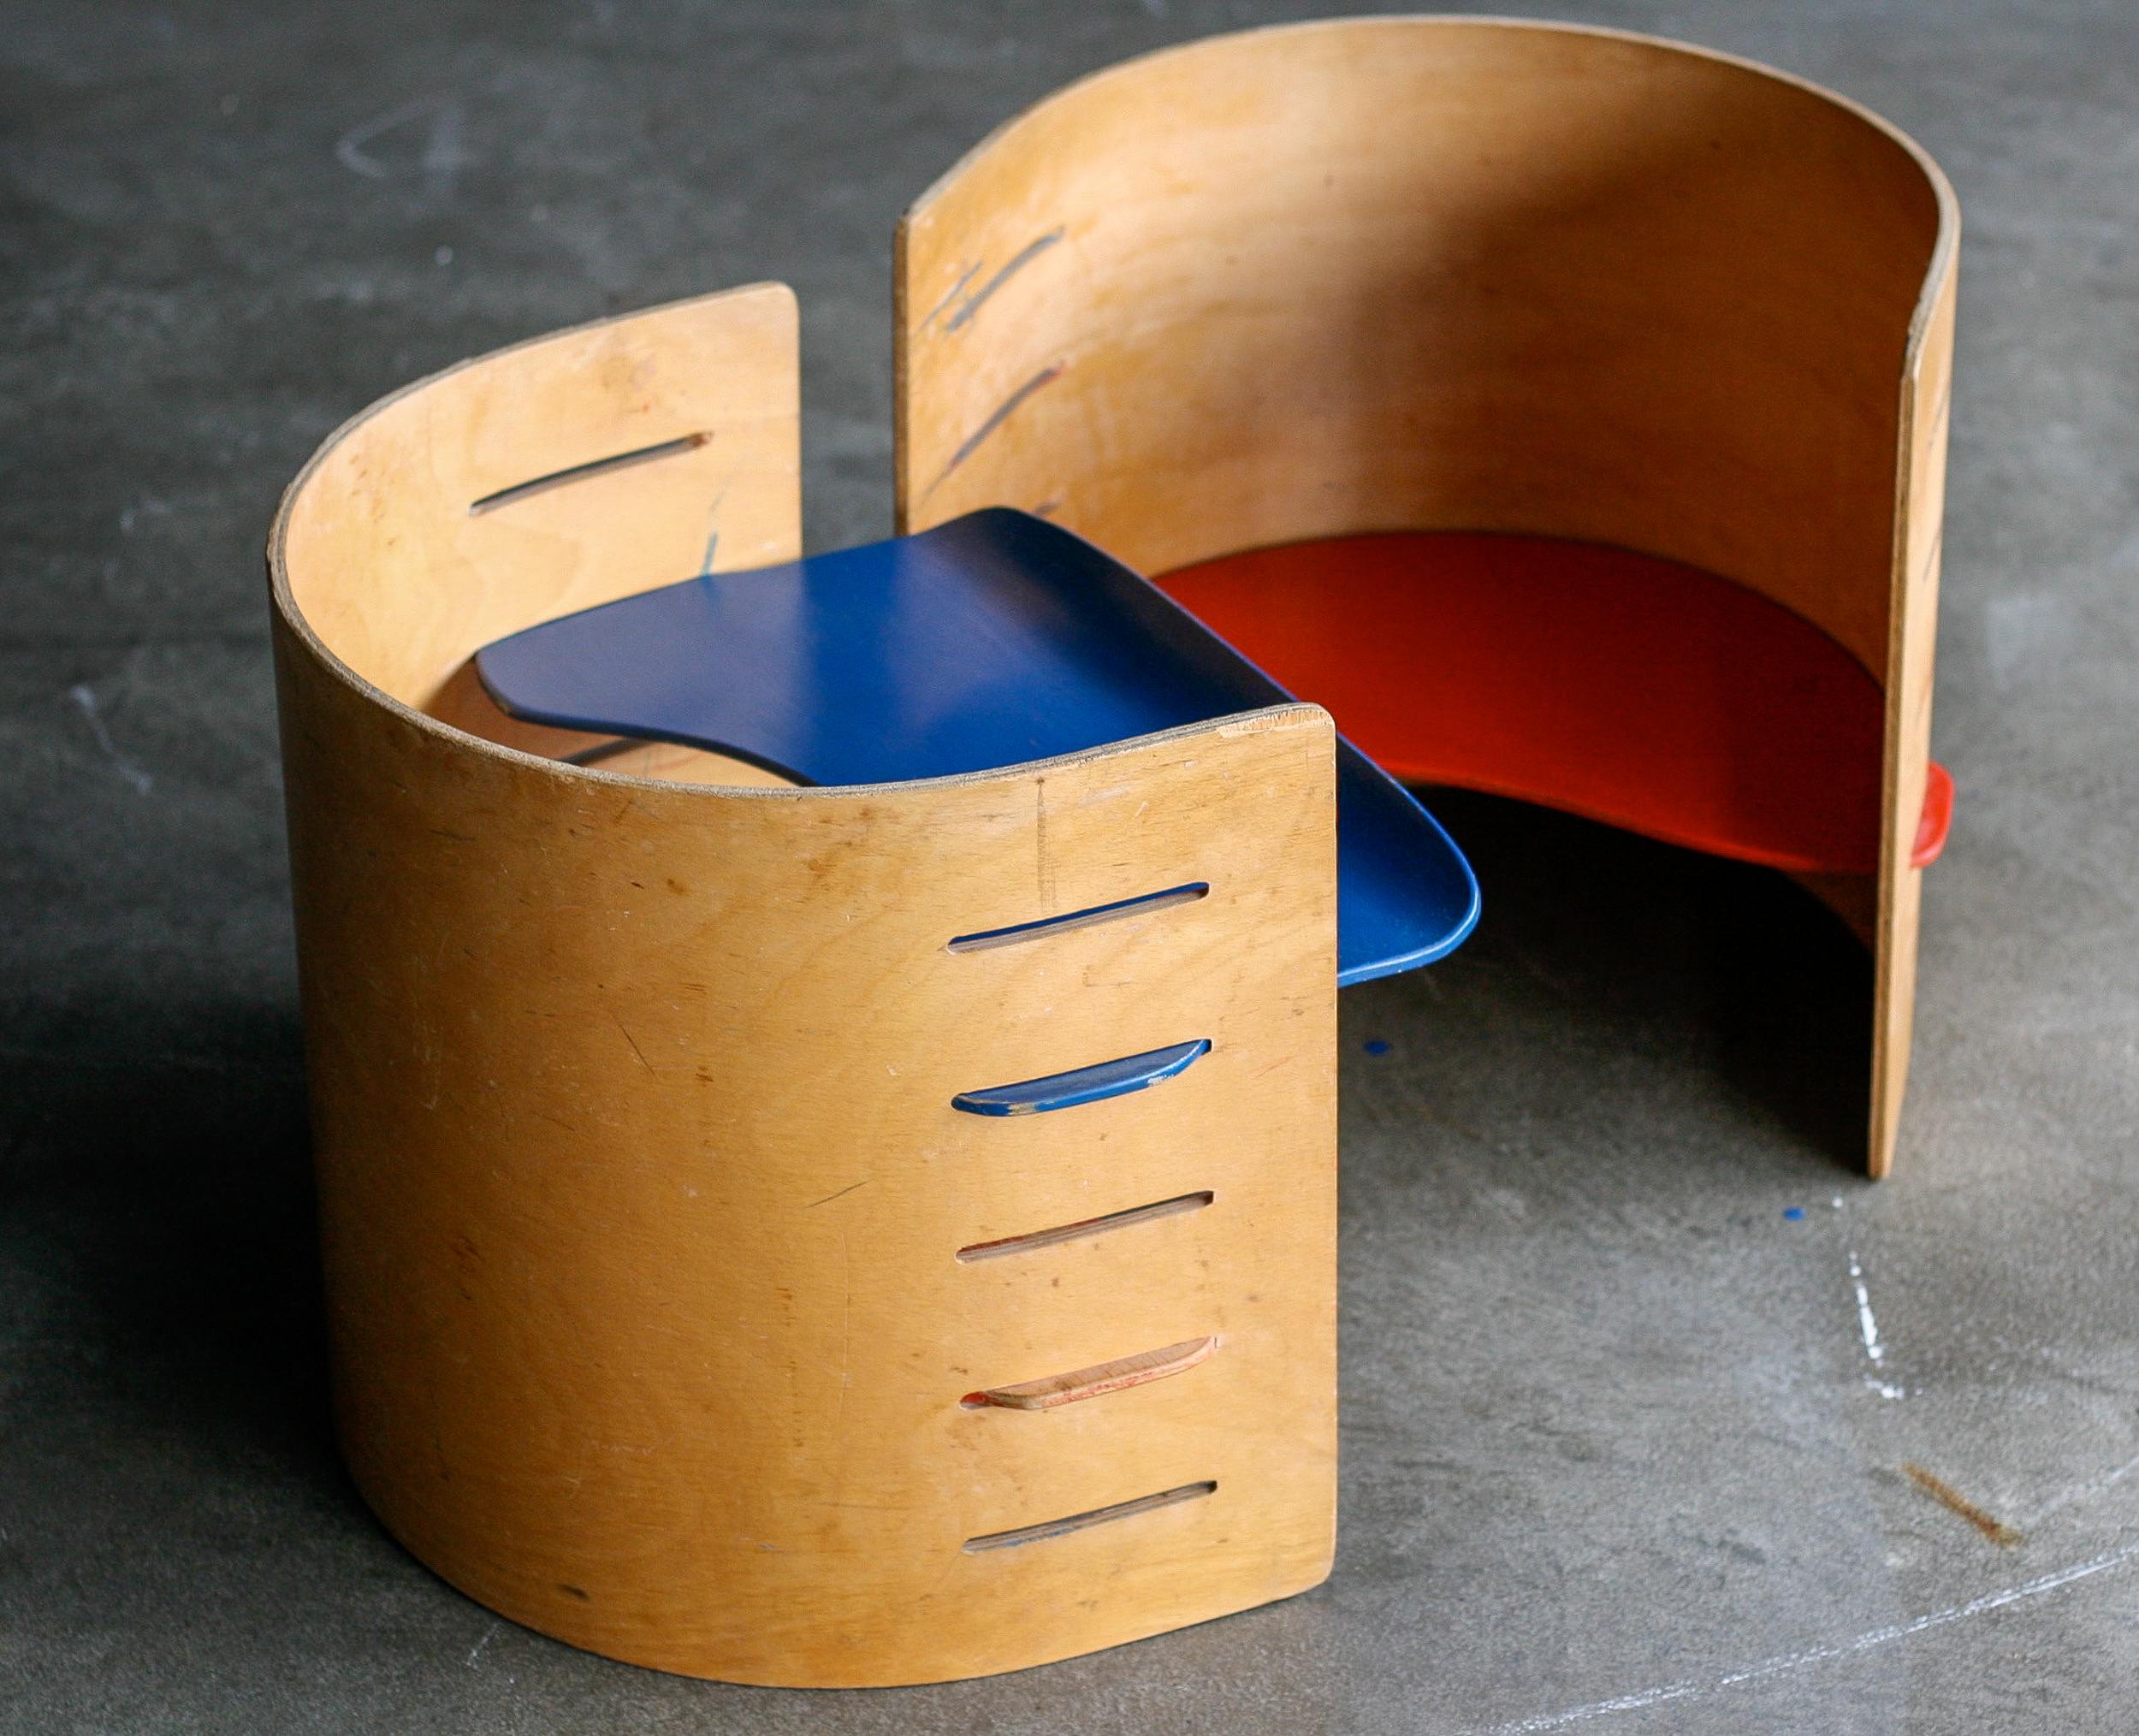 Kristian Vedel was one of the first architects that took children’s furniture seriously and designed furniture in a simple, modern style, and still created on the premise of the child. The child’s chair is not just a copy of the “grown-up”